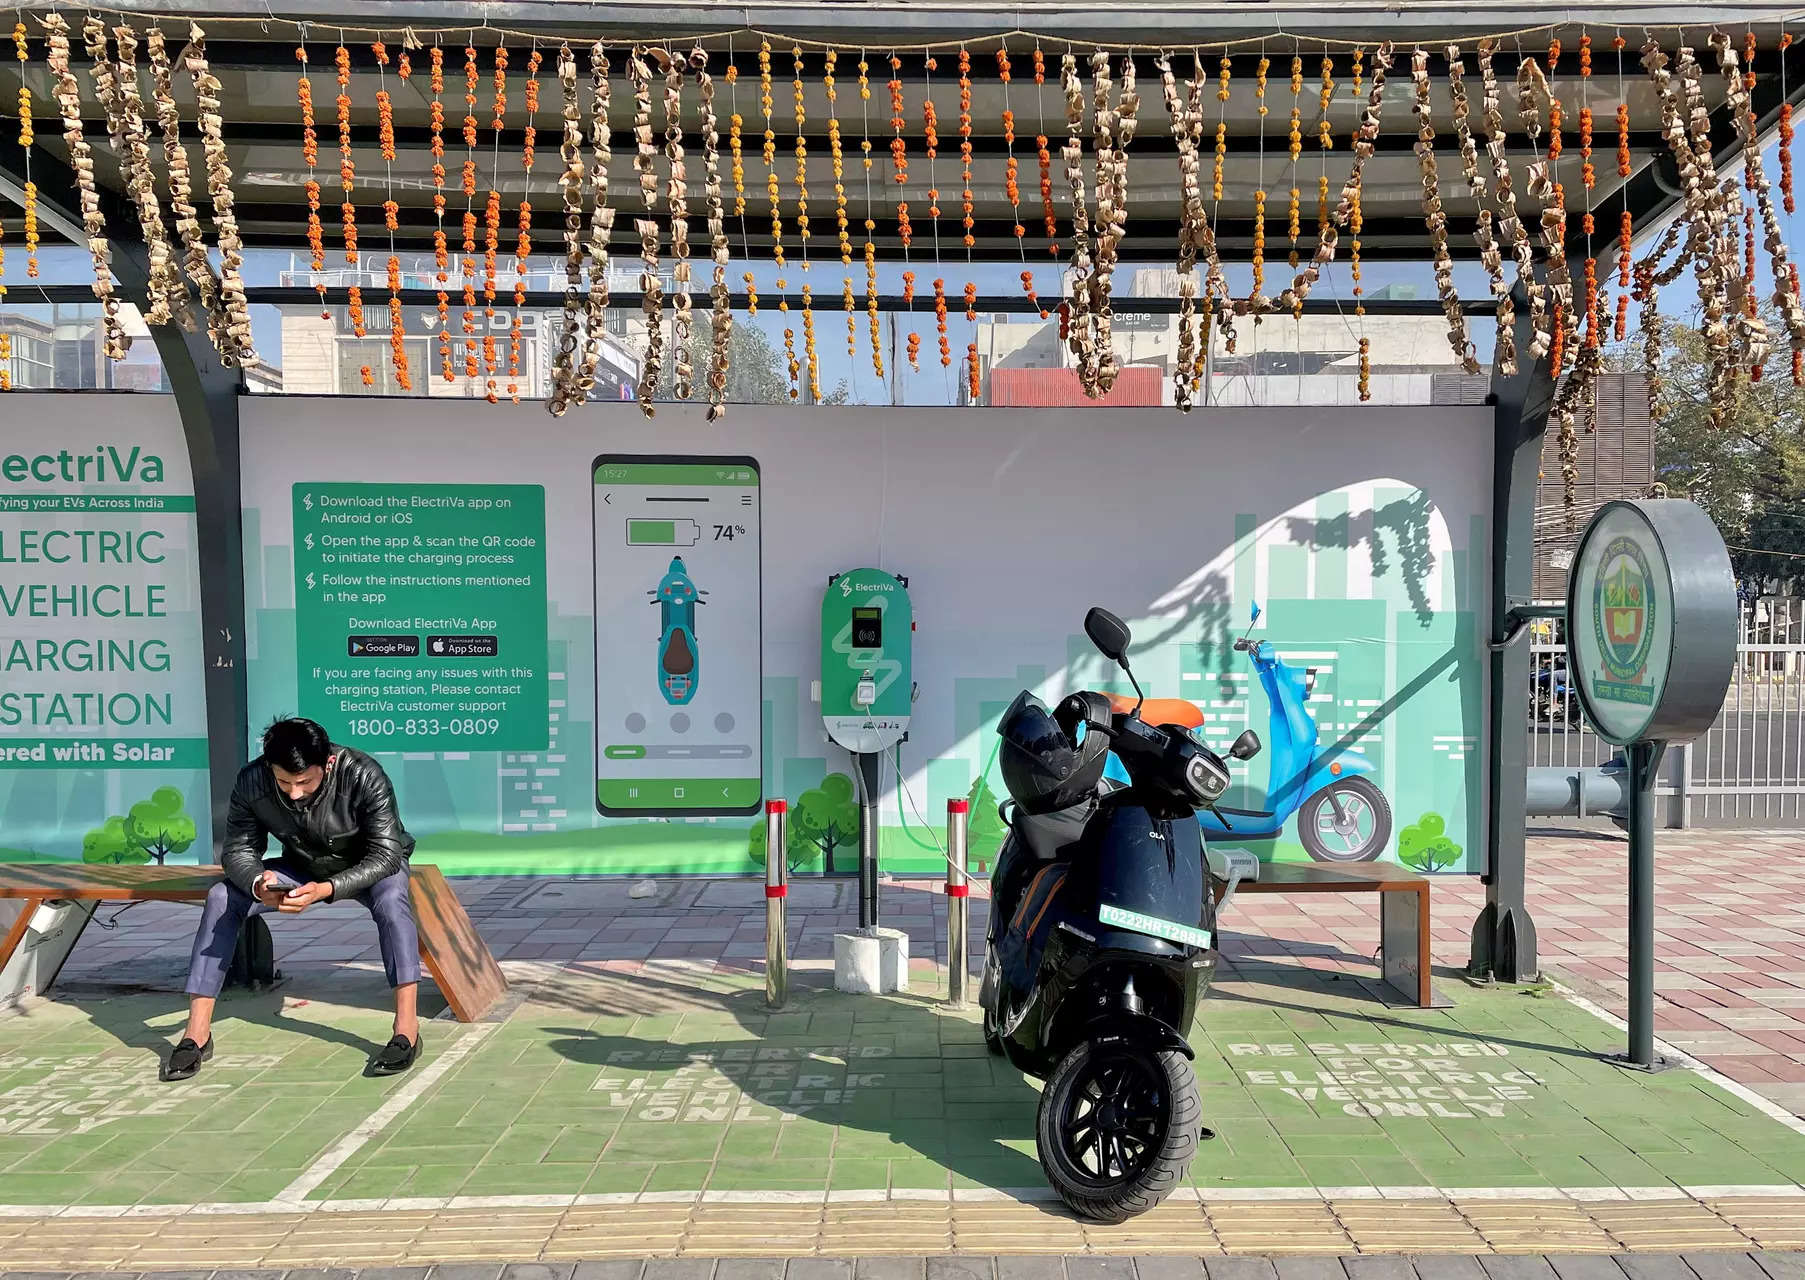 You can save up to Rs 32,500 on electric scooters before June 1